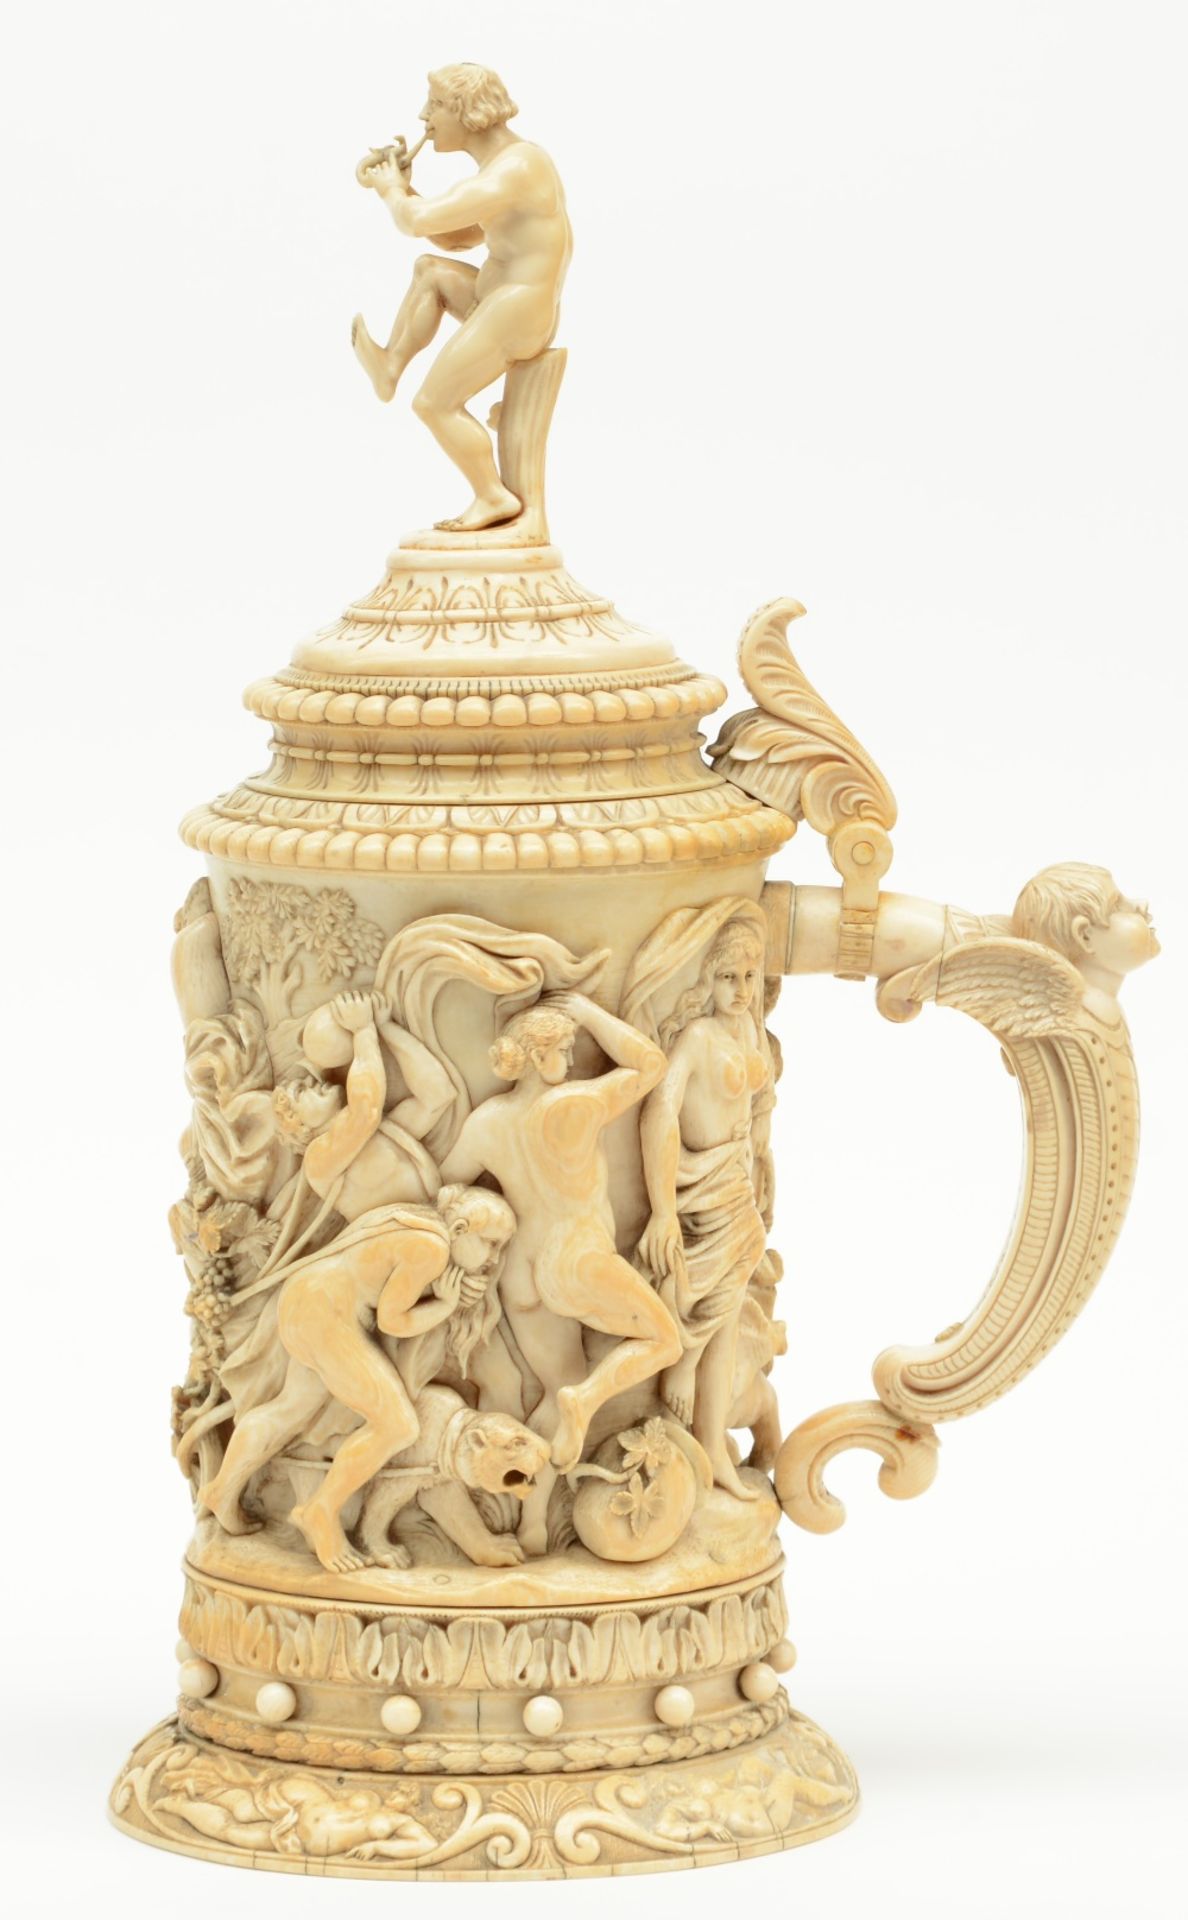 A rare German ivory Humpen, alto relievo sculpted with Bacchus on a chariot preceded by a drunken - Image 3 of 14